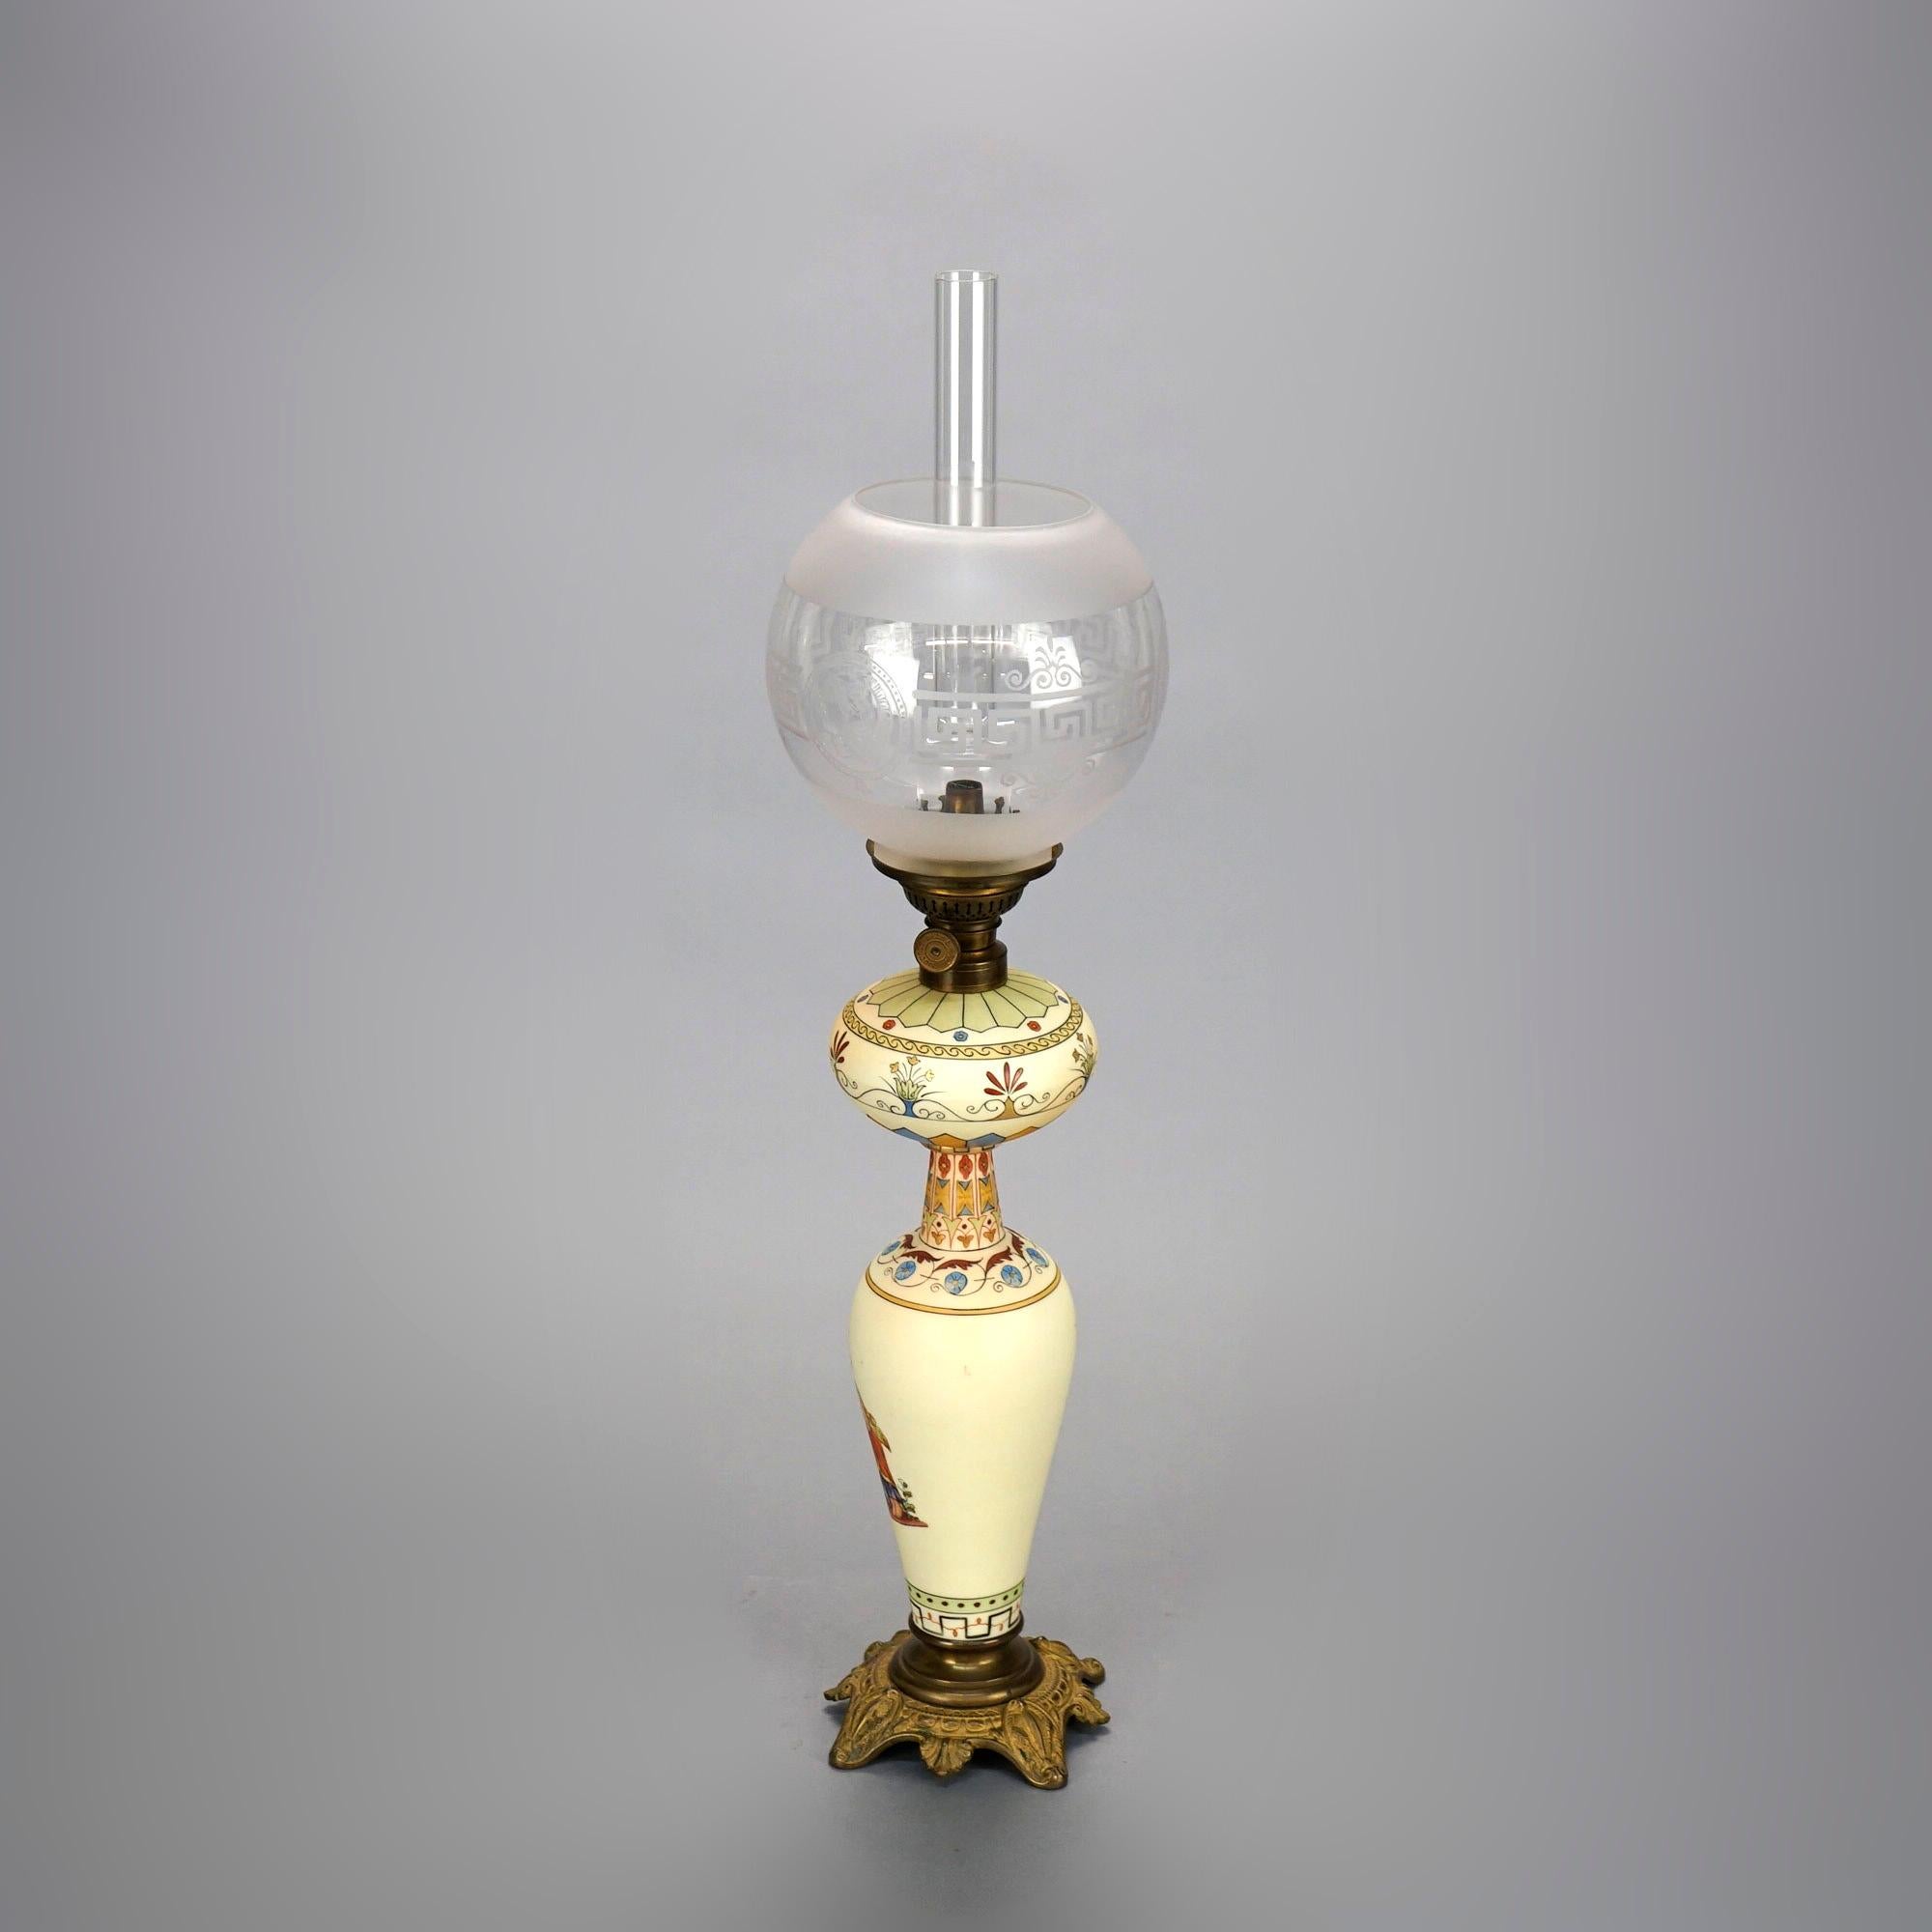 Hand-Painted Antique Italian Hand Painted Porcelain Banquet Oil Lamp with Genre Scene, 19th C